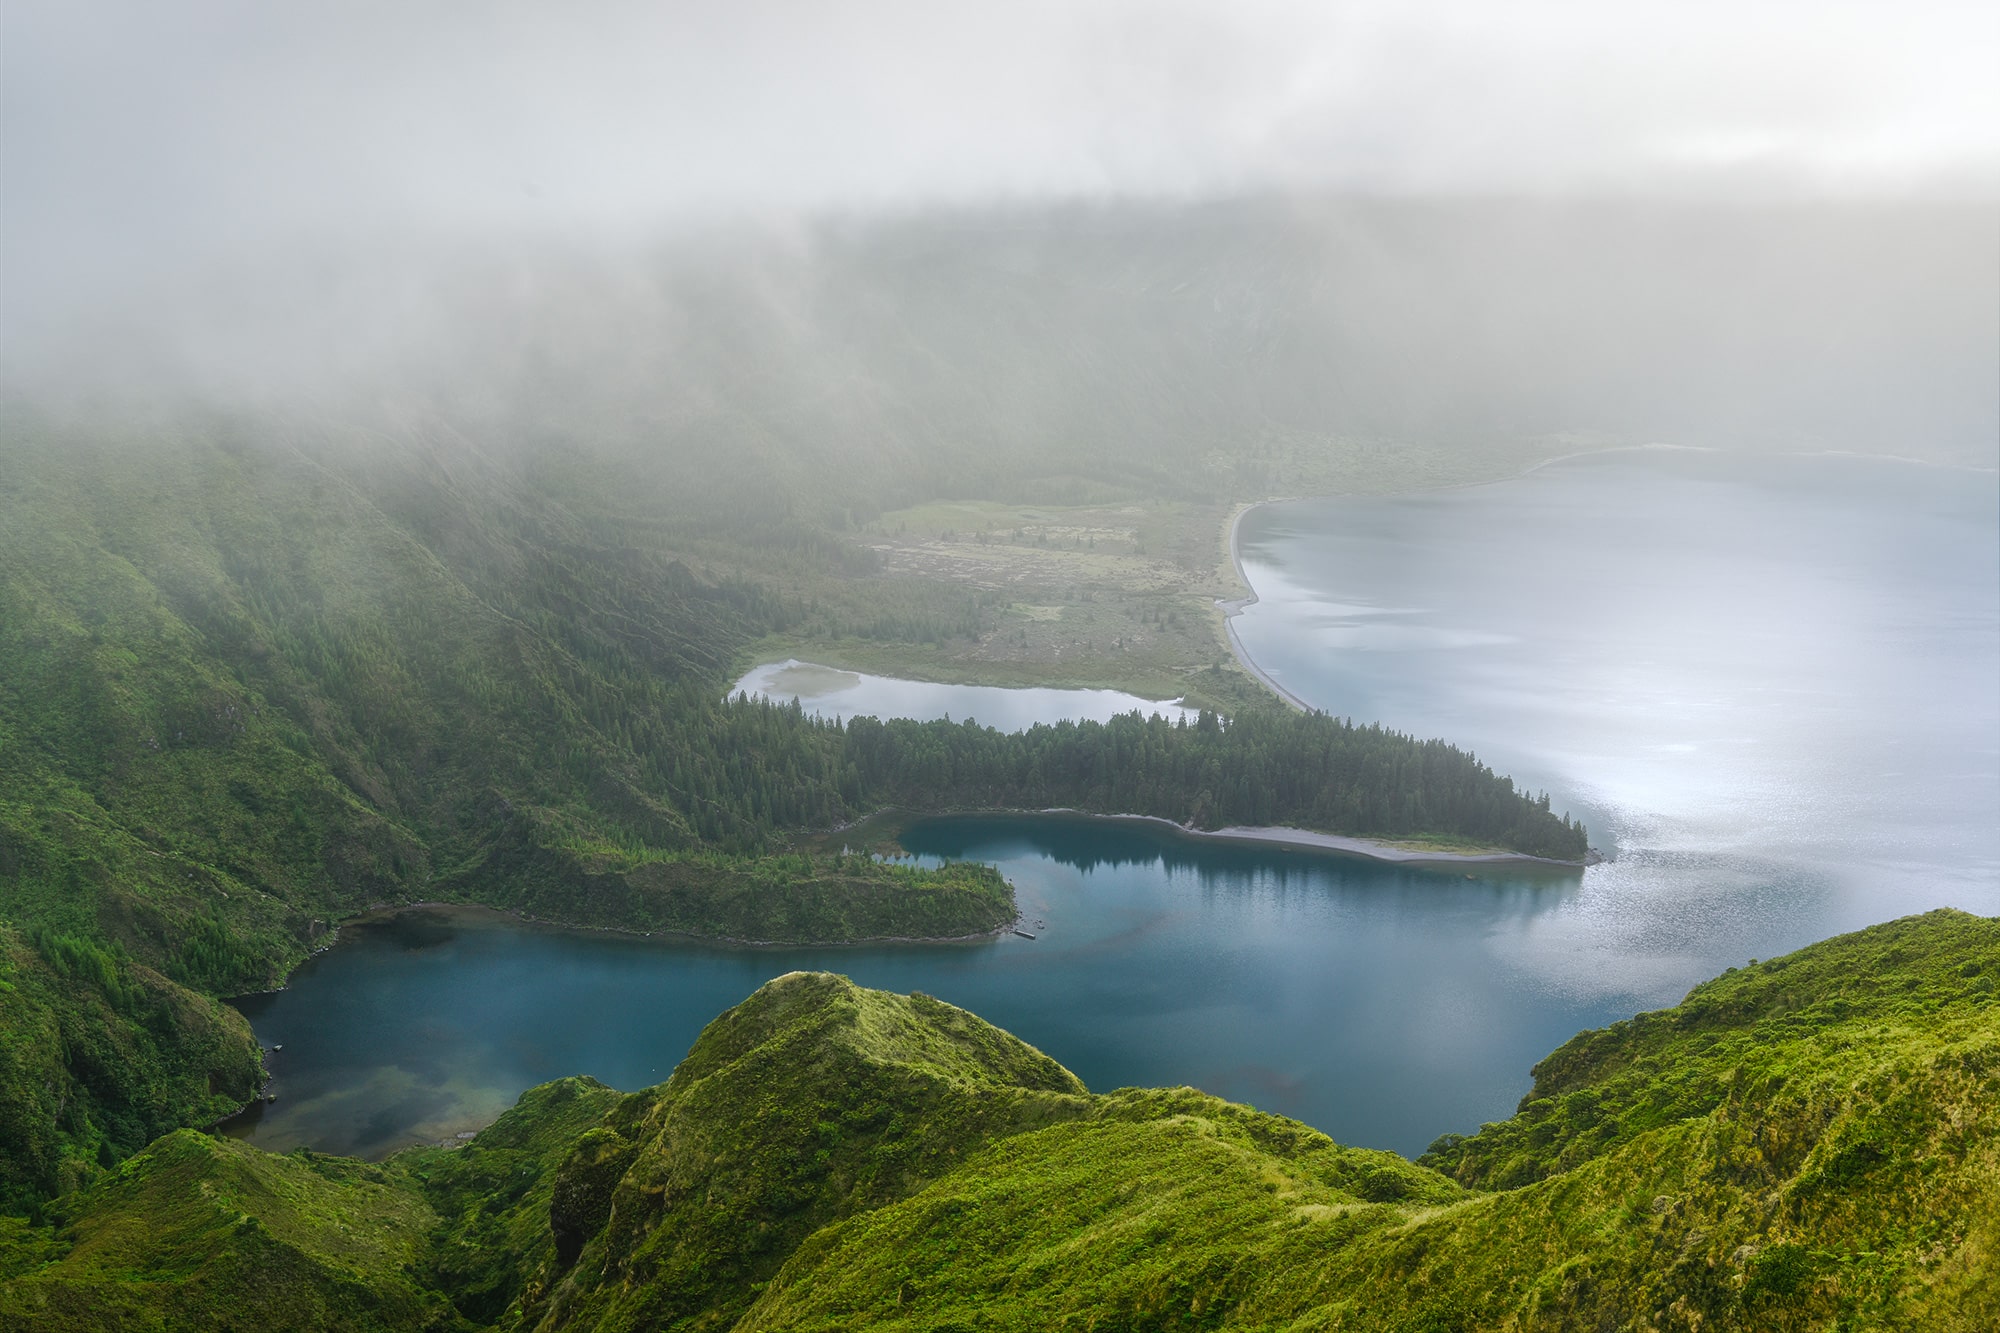 Behold the mesmerizing beauty of Lago do Fogo in São Miguel, captured through the lens of Jennifer Esseiva and her Nikon D810. This epic landscape photography showcases a foggy sunrise over the tranquil waters, enveloping the scene in an ethereal mist. Despite the raining morning, the serene ambiance of the lake remains undisturbed, offering a captivating view of nature's serene allure. Join Esseiva on this visual journey through São Miguel's breathtaking vistas, where every frame tells a story of the island's timeless charm and natural splendor.